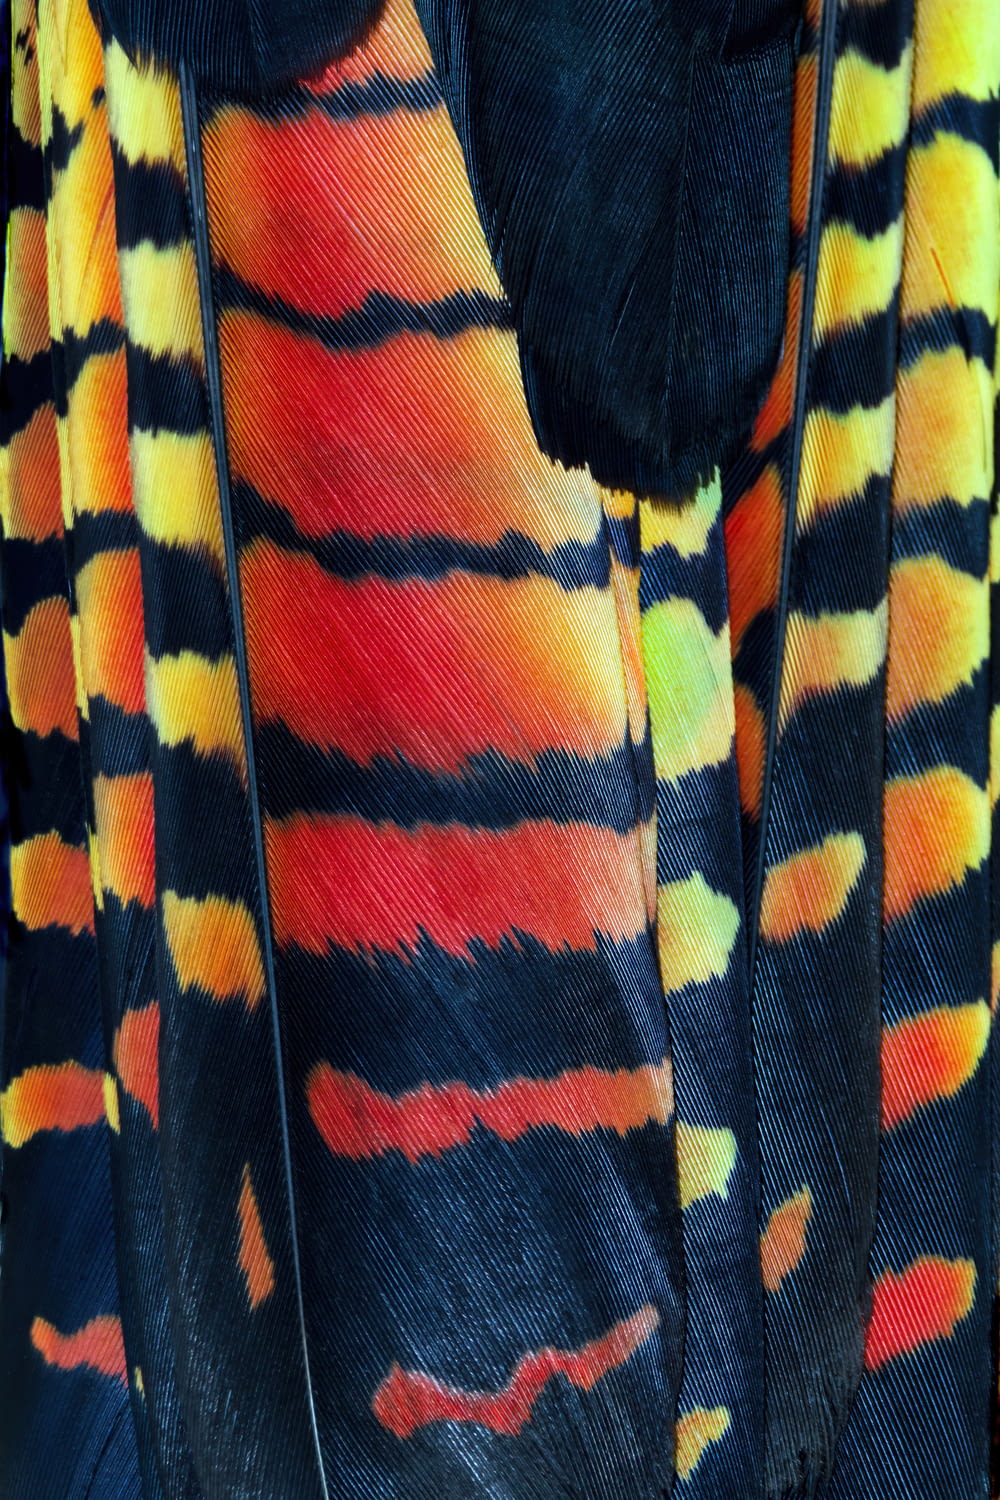 a close up of an elephant's colorful coat